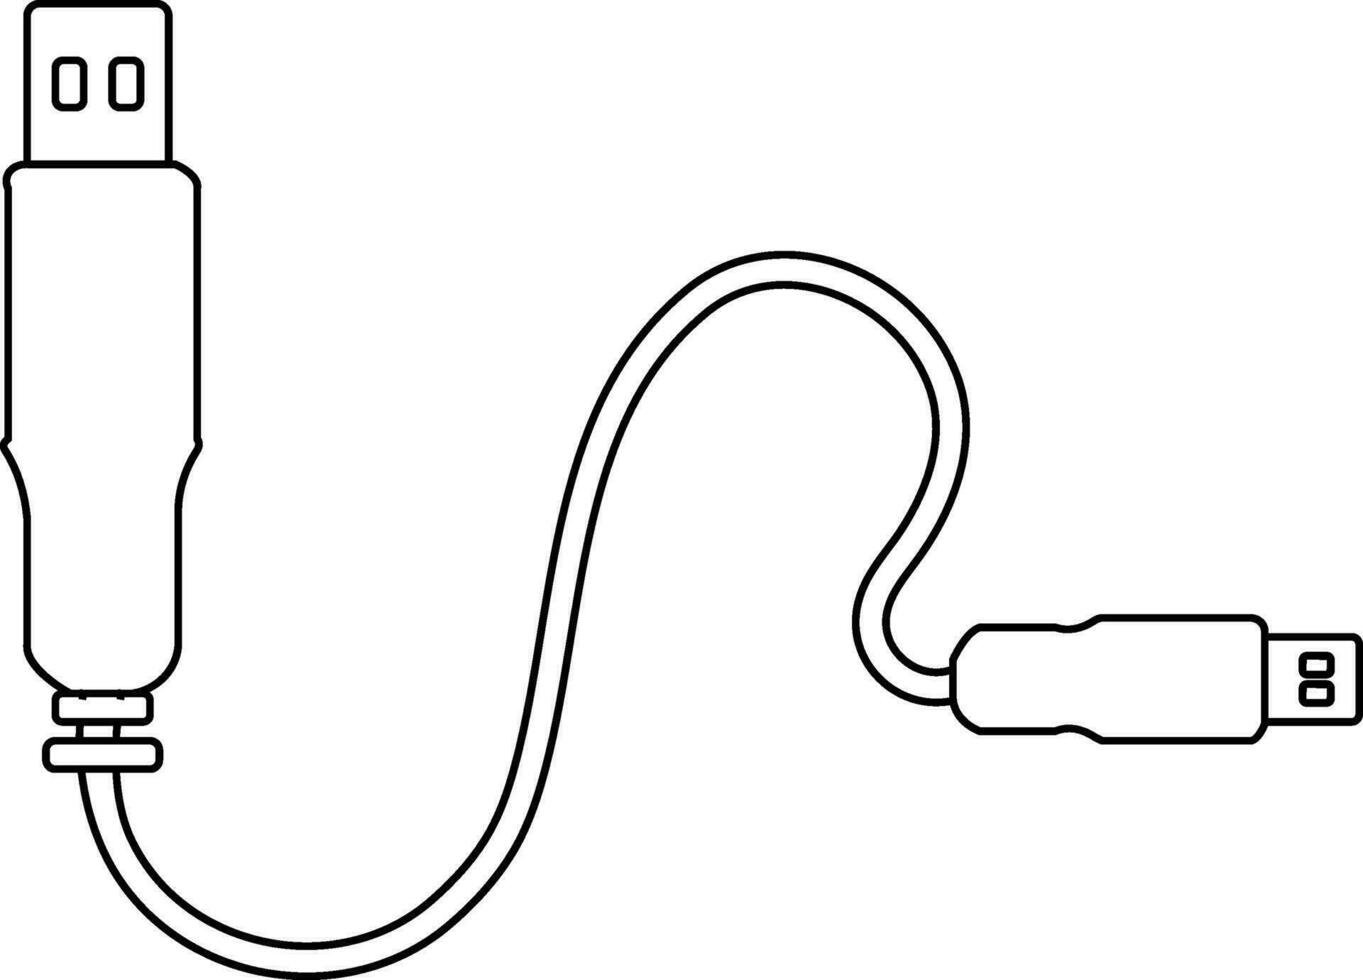 Usb cable in black line art. vector